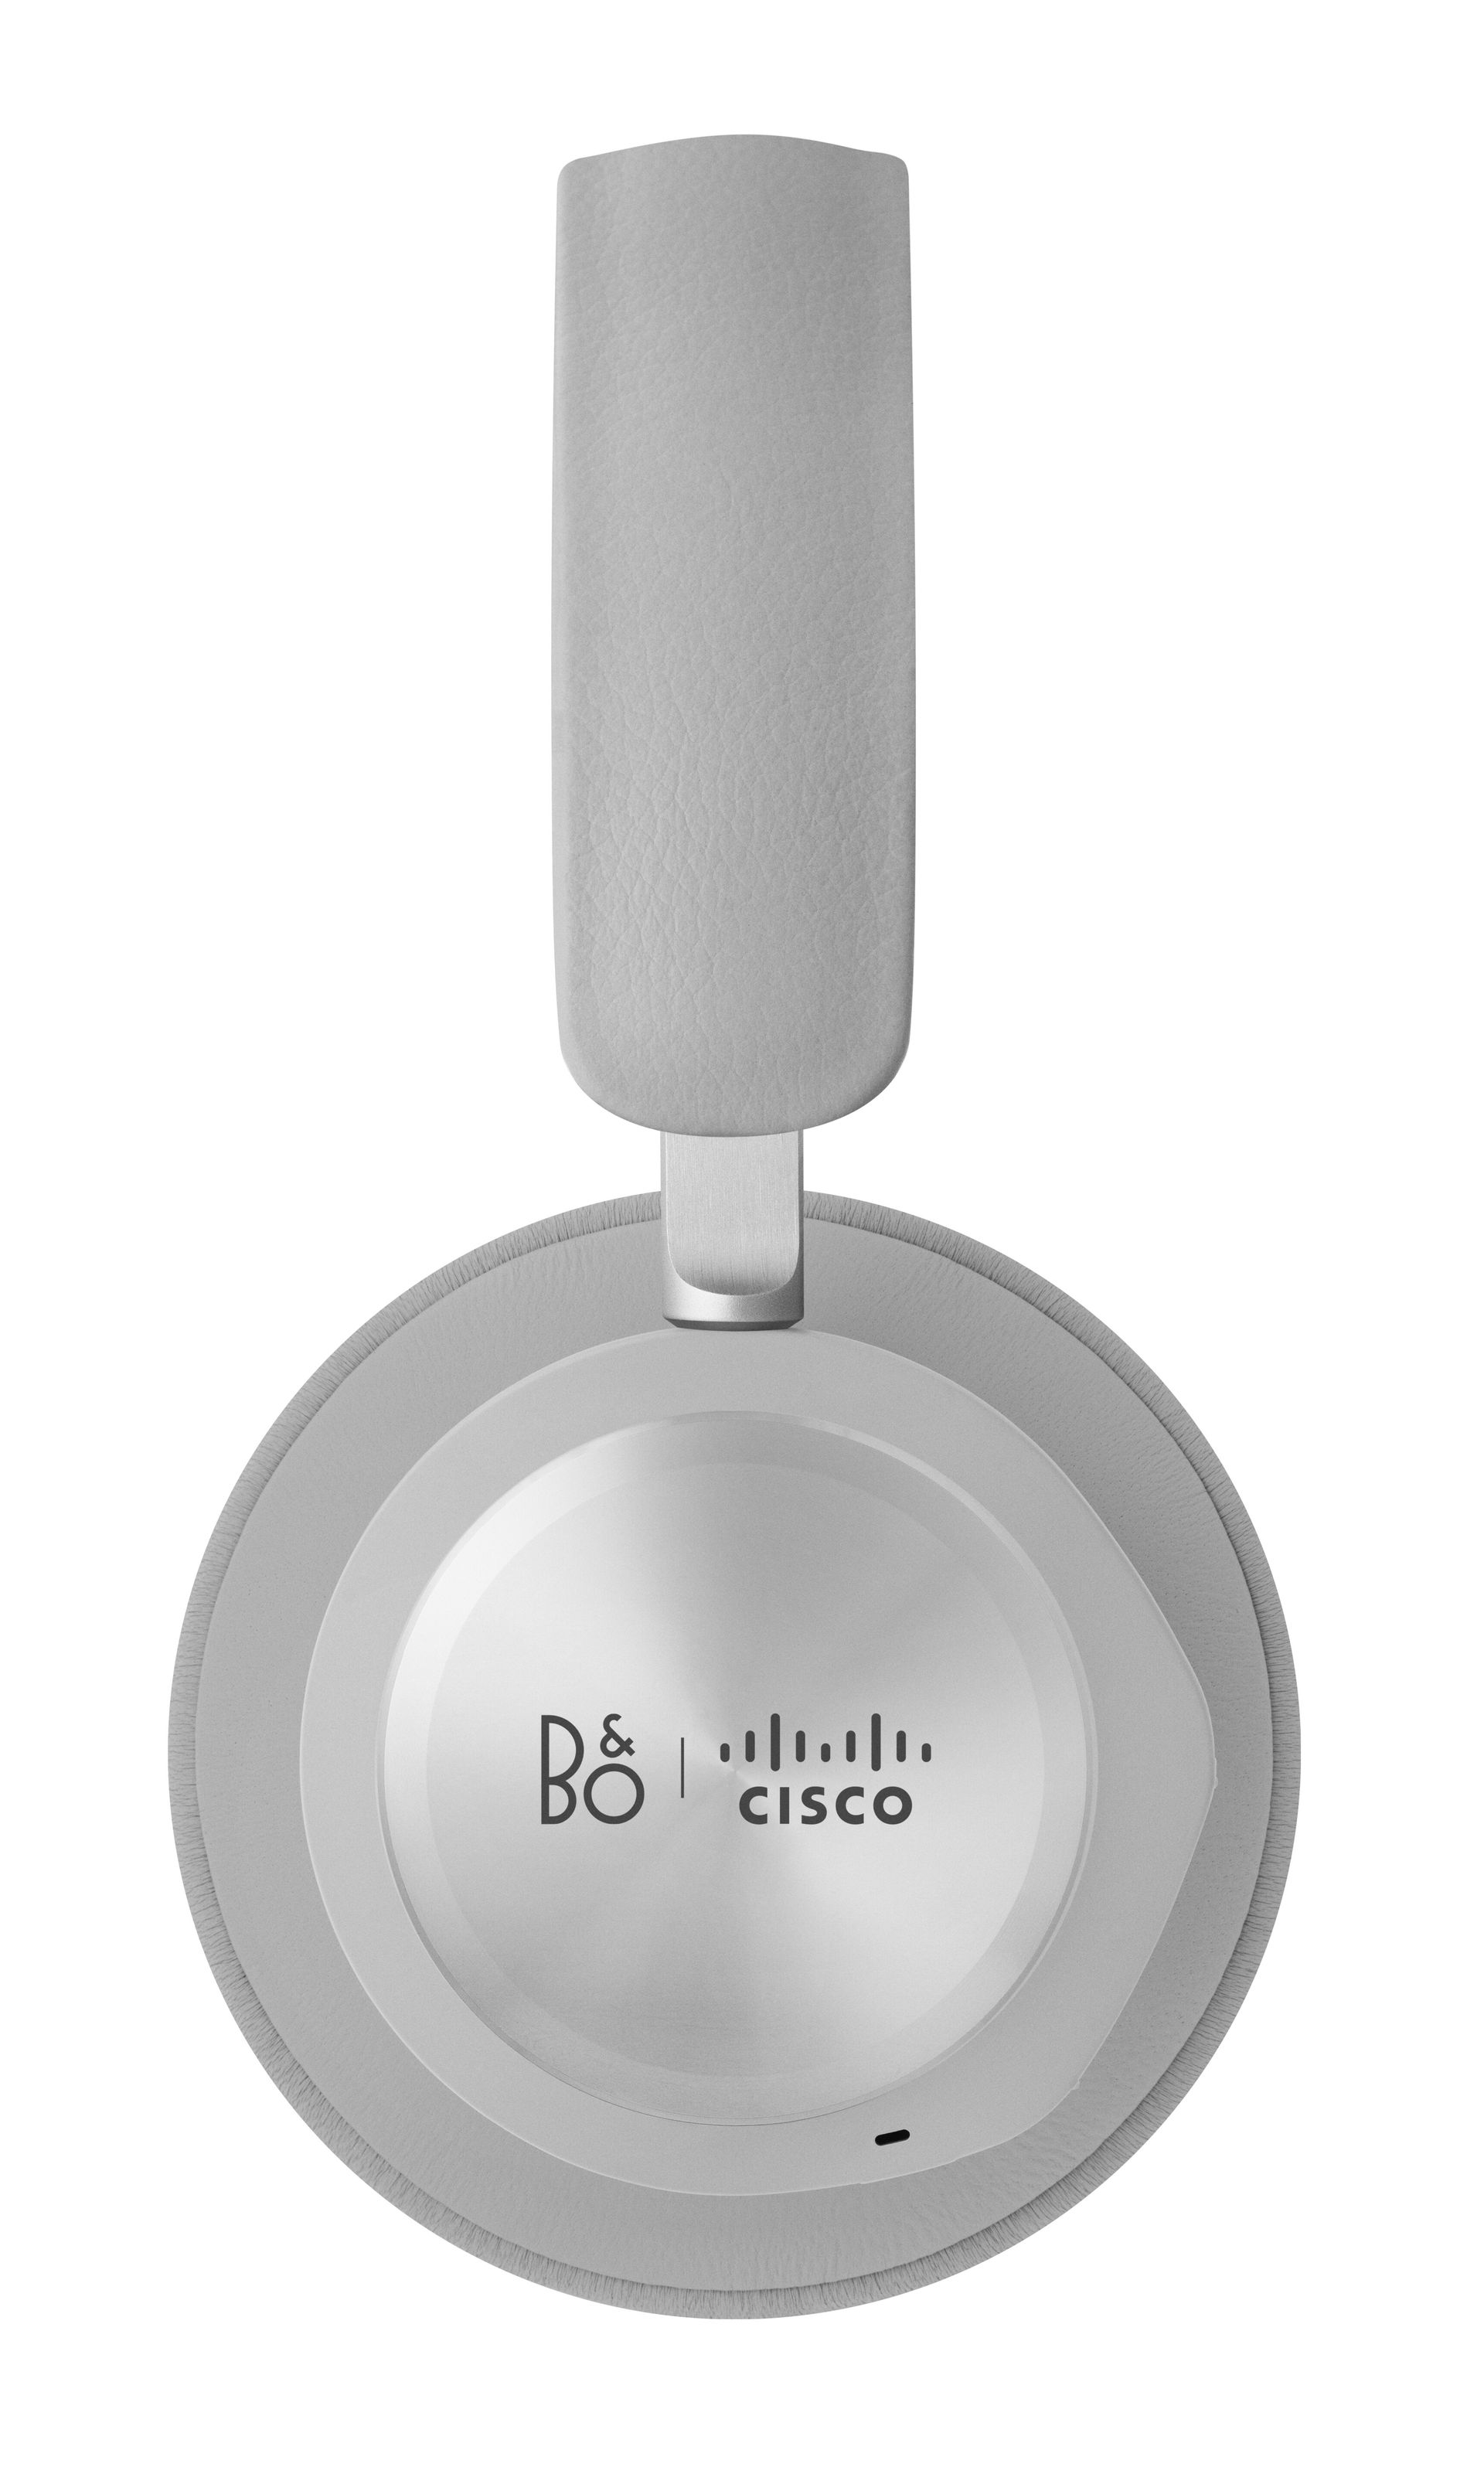 A side view of the Bang & Olufsen Cisco 980 headset. The Bang & Olufsen and Cisco logos are visible on the outside of the ear cup.